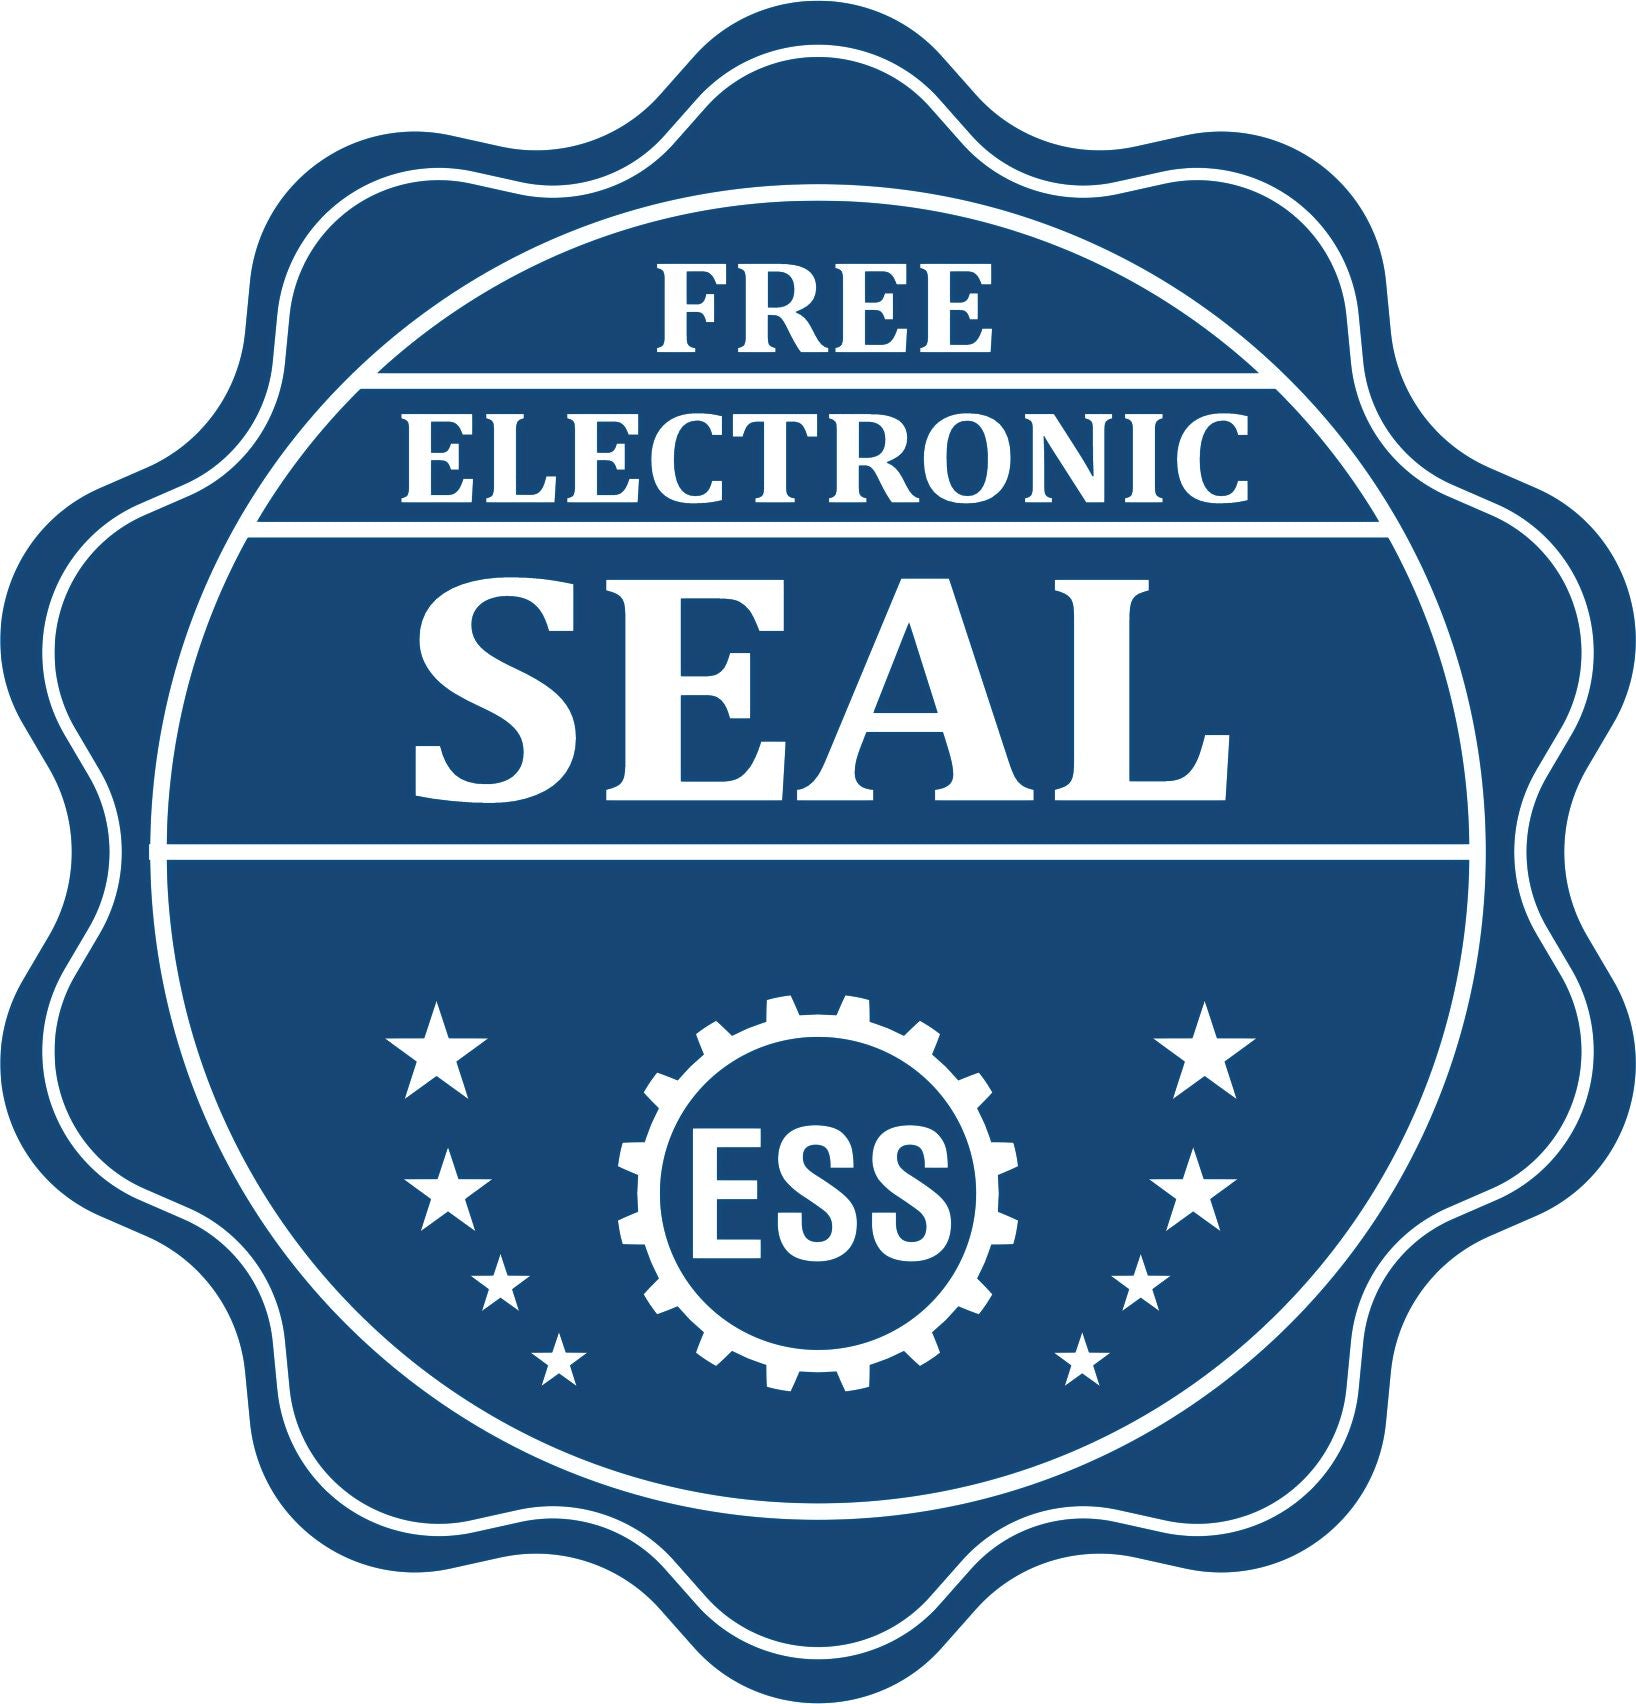 A badge showing a free electronic seal for the Slim Pre-Inked Nebraska Landscape Architect Seal Stamp with stars and the ESS gear on the emblem.